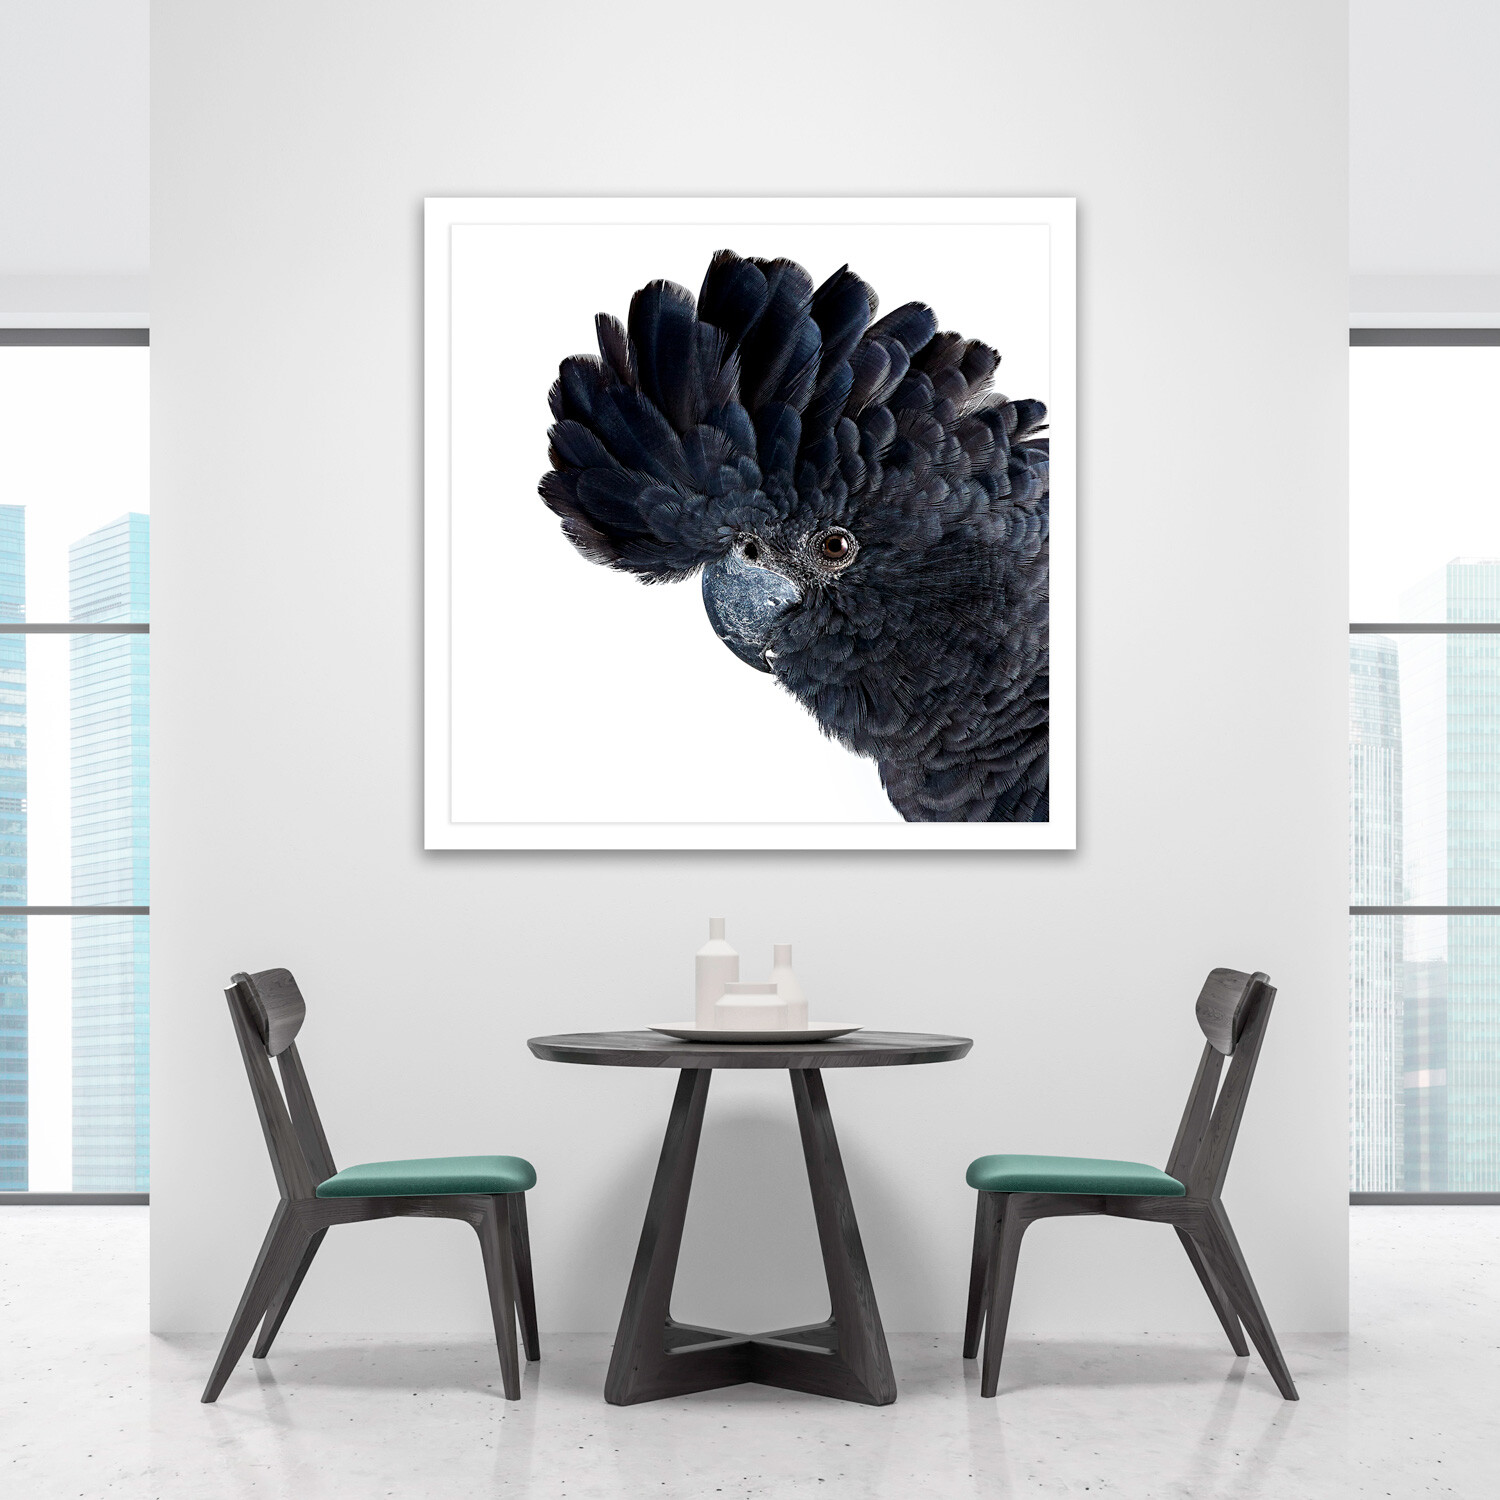 Fine art print of a black cockatoo - G'DAY on your wall